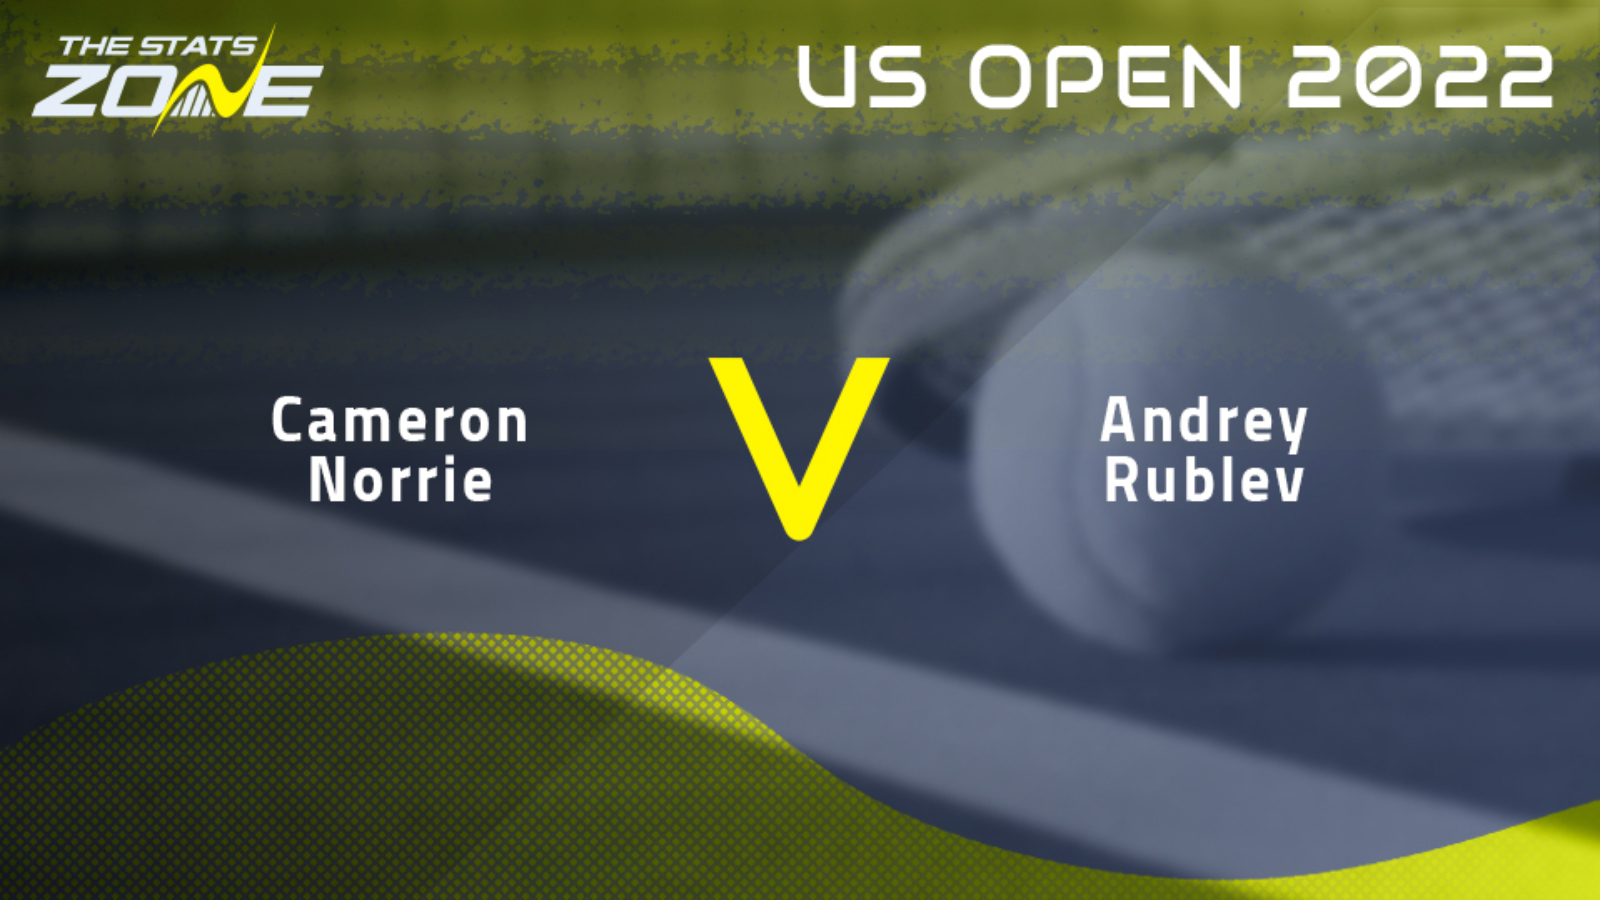 Cameron Norrie vs Andrey Rublev – Round of 16